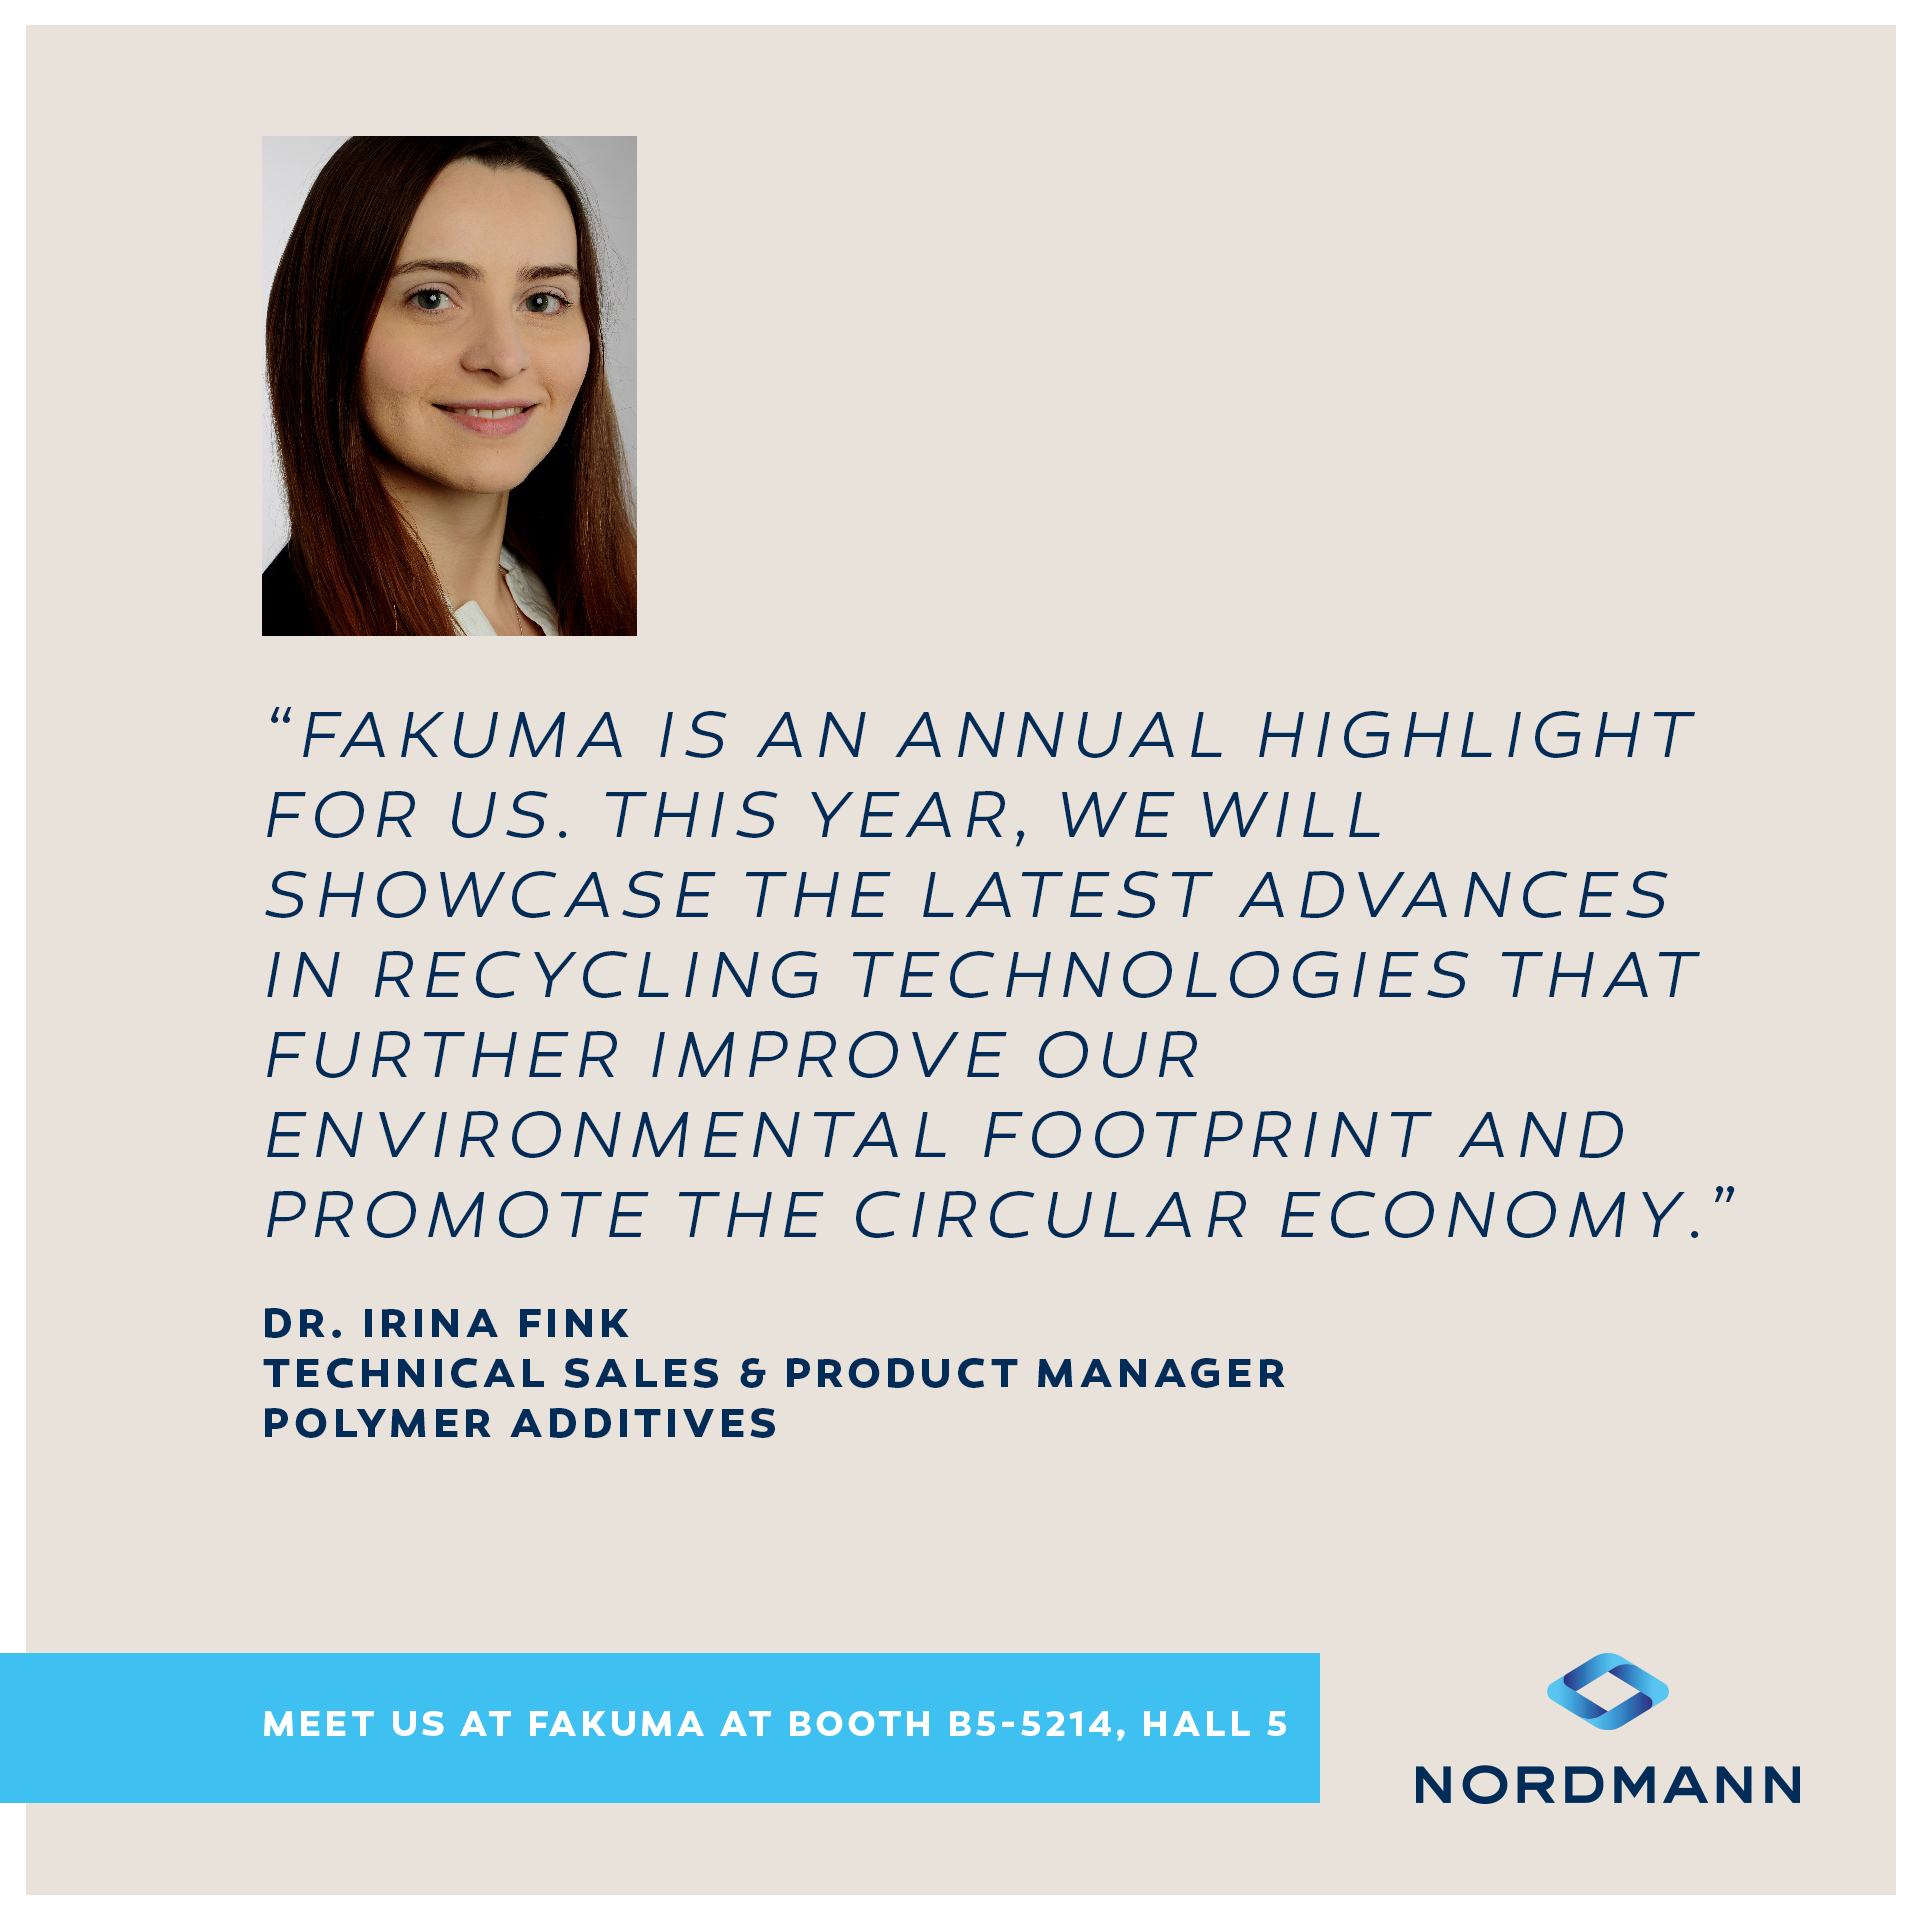 Quote by Dr. Irina Fink, Technical Sales & Product Manager, Polymer Additives, Nordmann, Rassmann GmbH